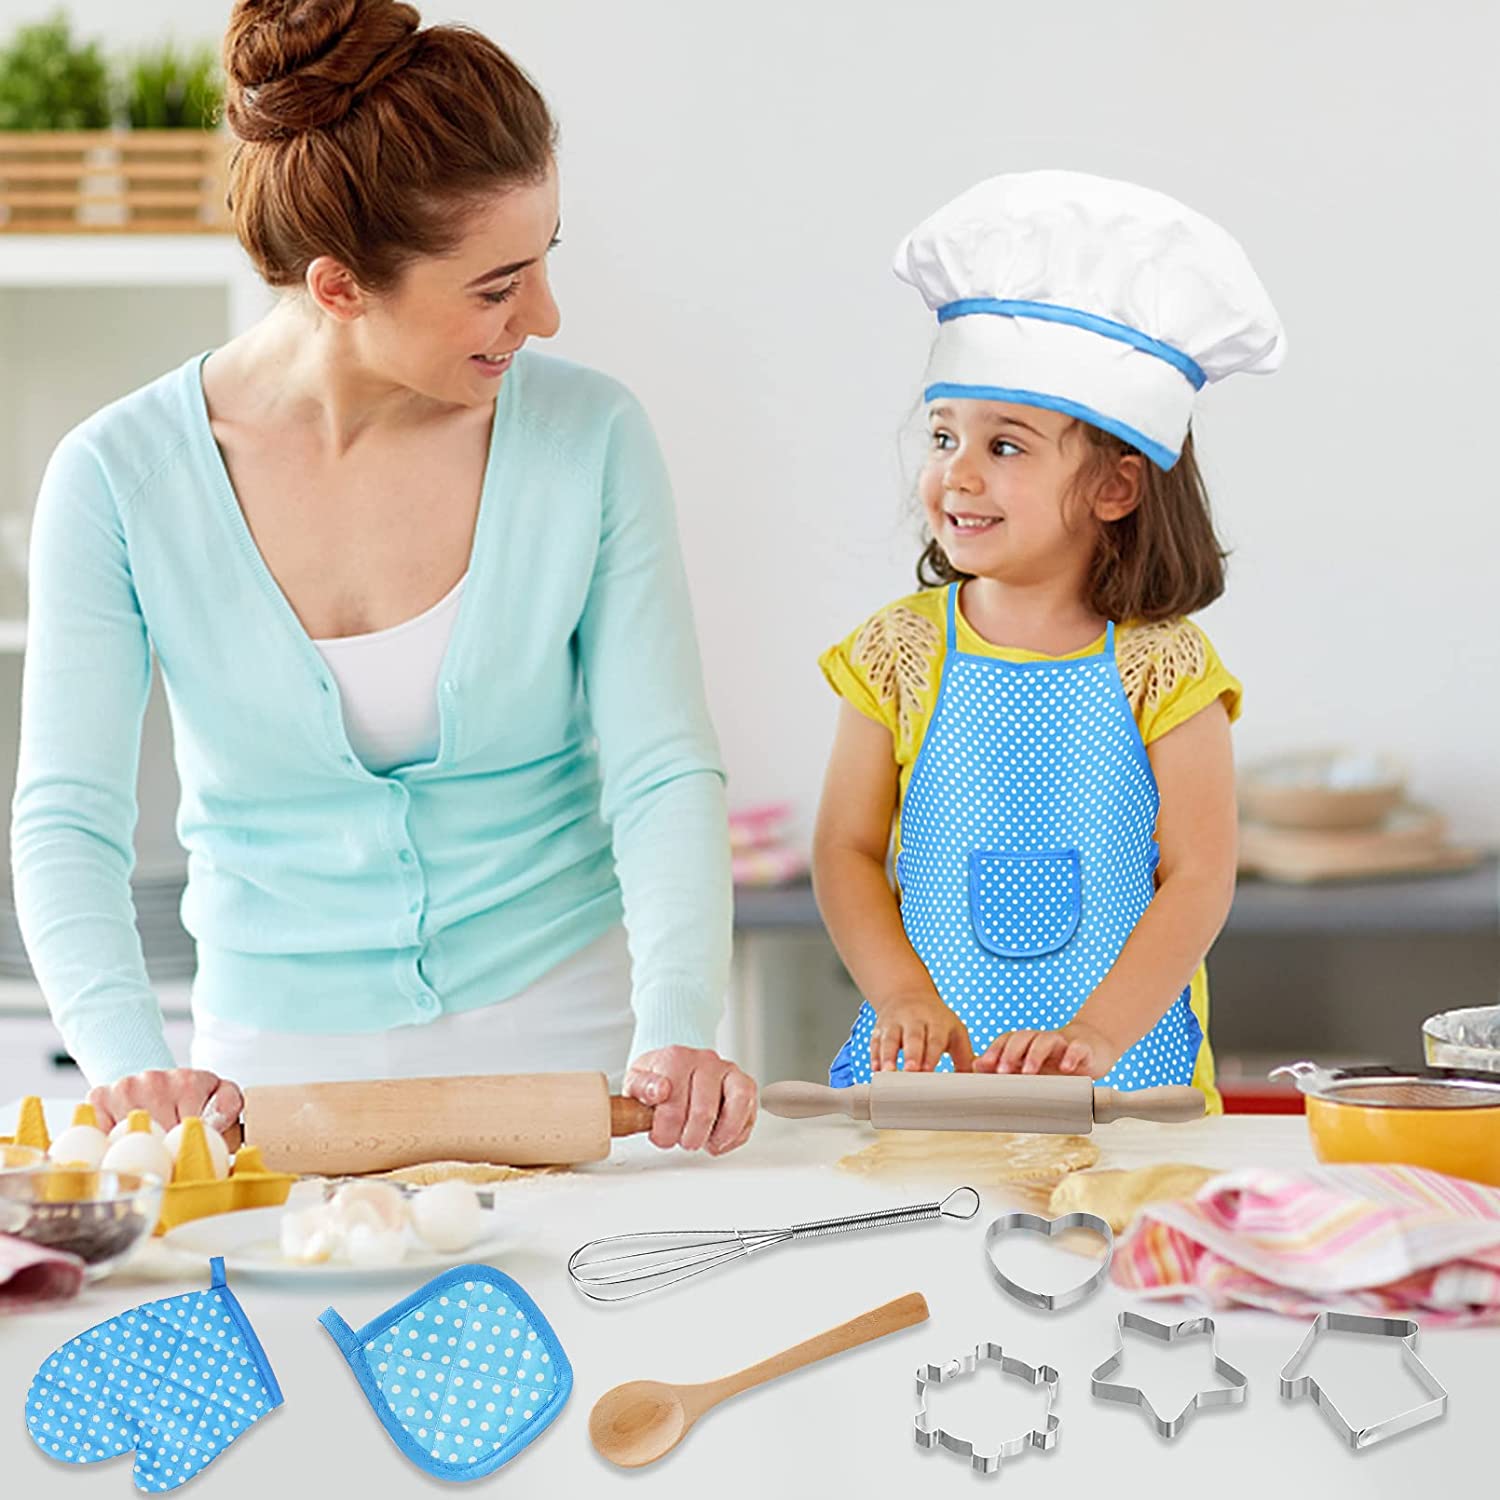 Kids Cooking And Baking Set,11 Pcs Kids Aprons for Girls,Chef Costume Set,Includes Kids Apron And Chef Hat,Mitt & Cooking Cutters,Toddler Chef Role Play Cooking Toys Gifts for Girls Ages 3-8 (Blue)